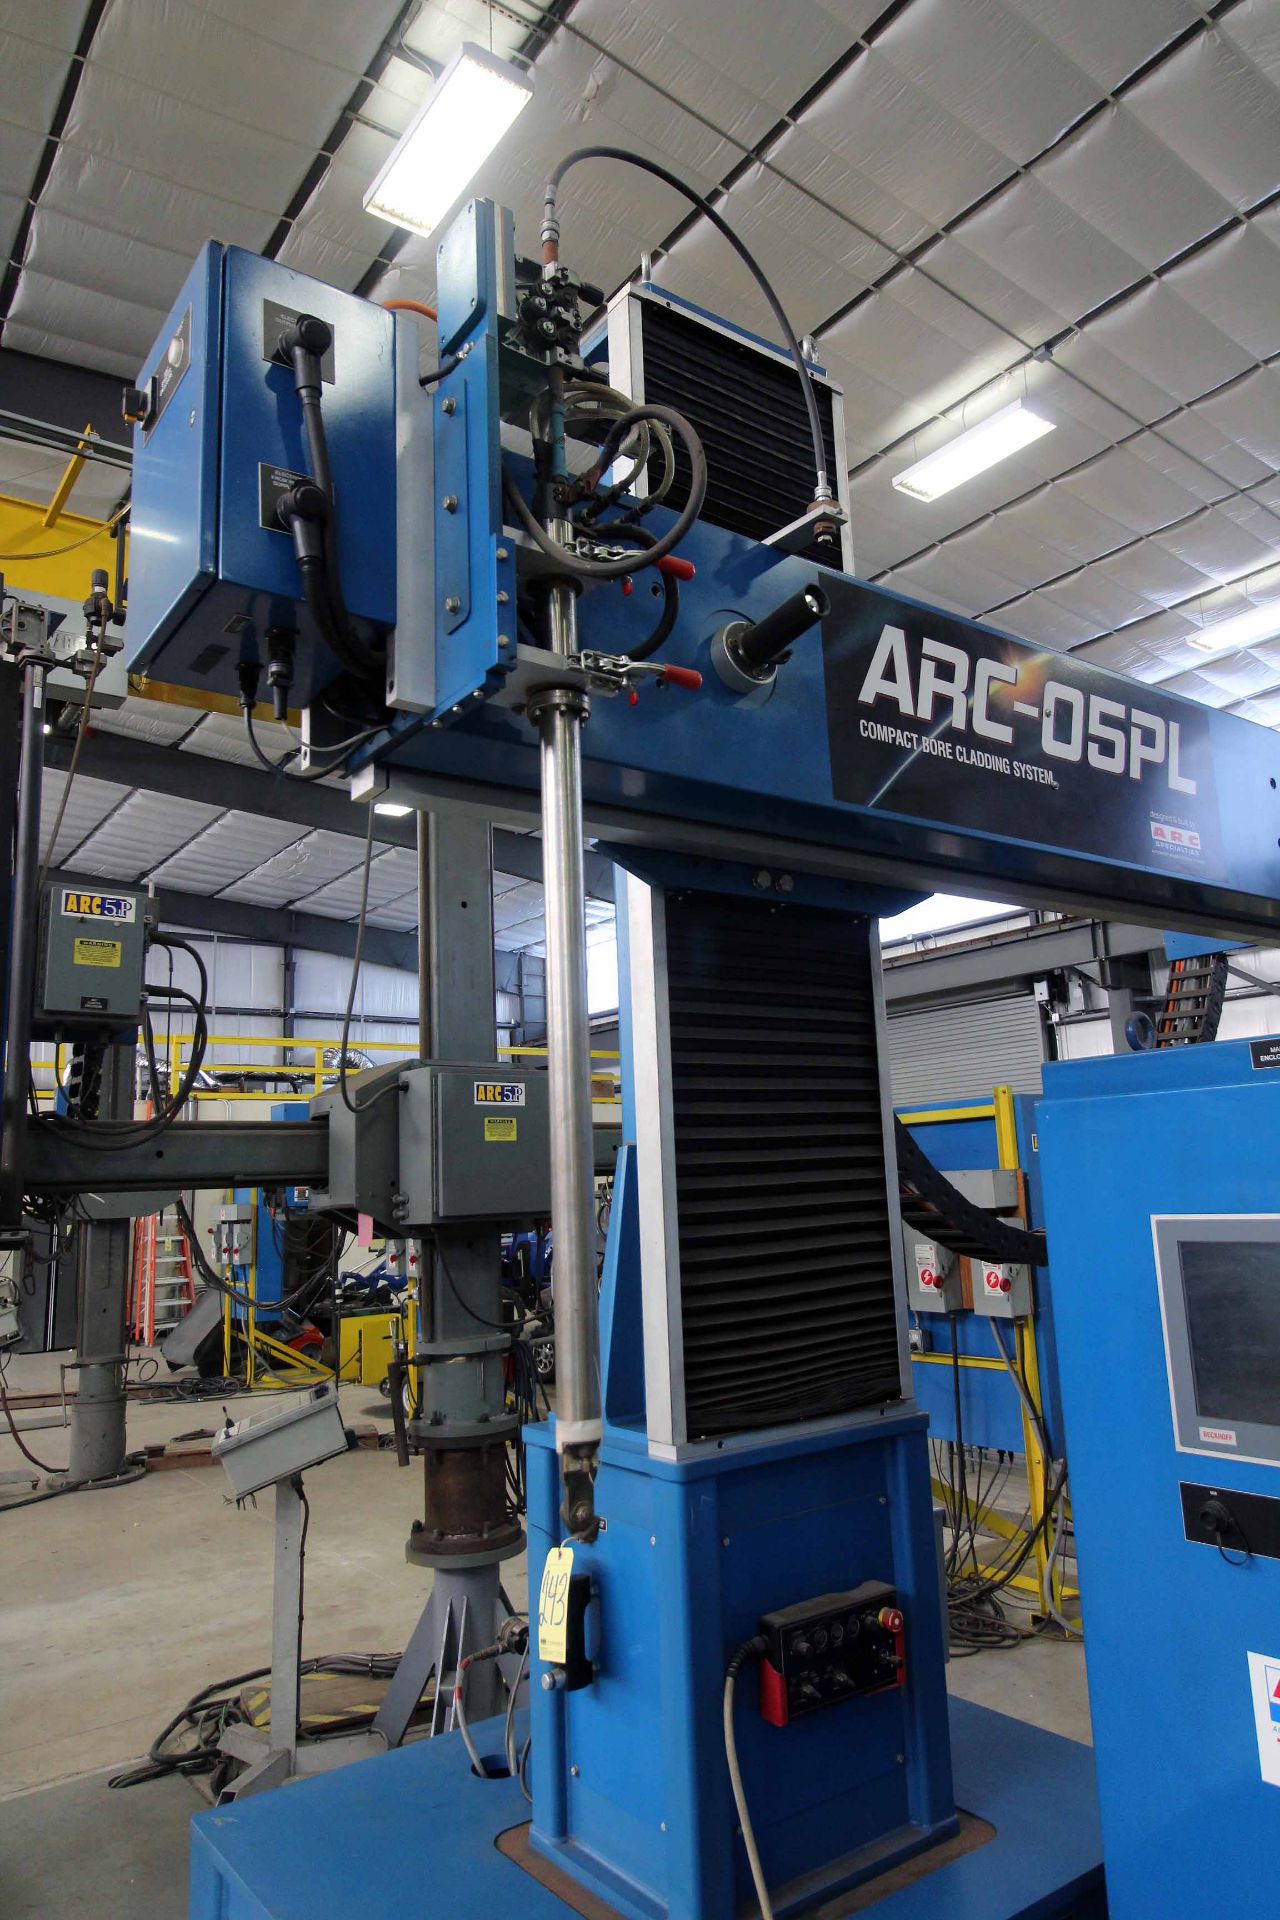 BORE CLADDING SYSTEM, ARC SPECIALTIES MDL. ARC-05PL, new 2014, 5,000 amps, Miller Mdl. XMT450 CC/ - Image 5 of 6